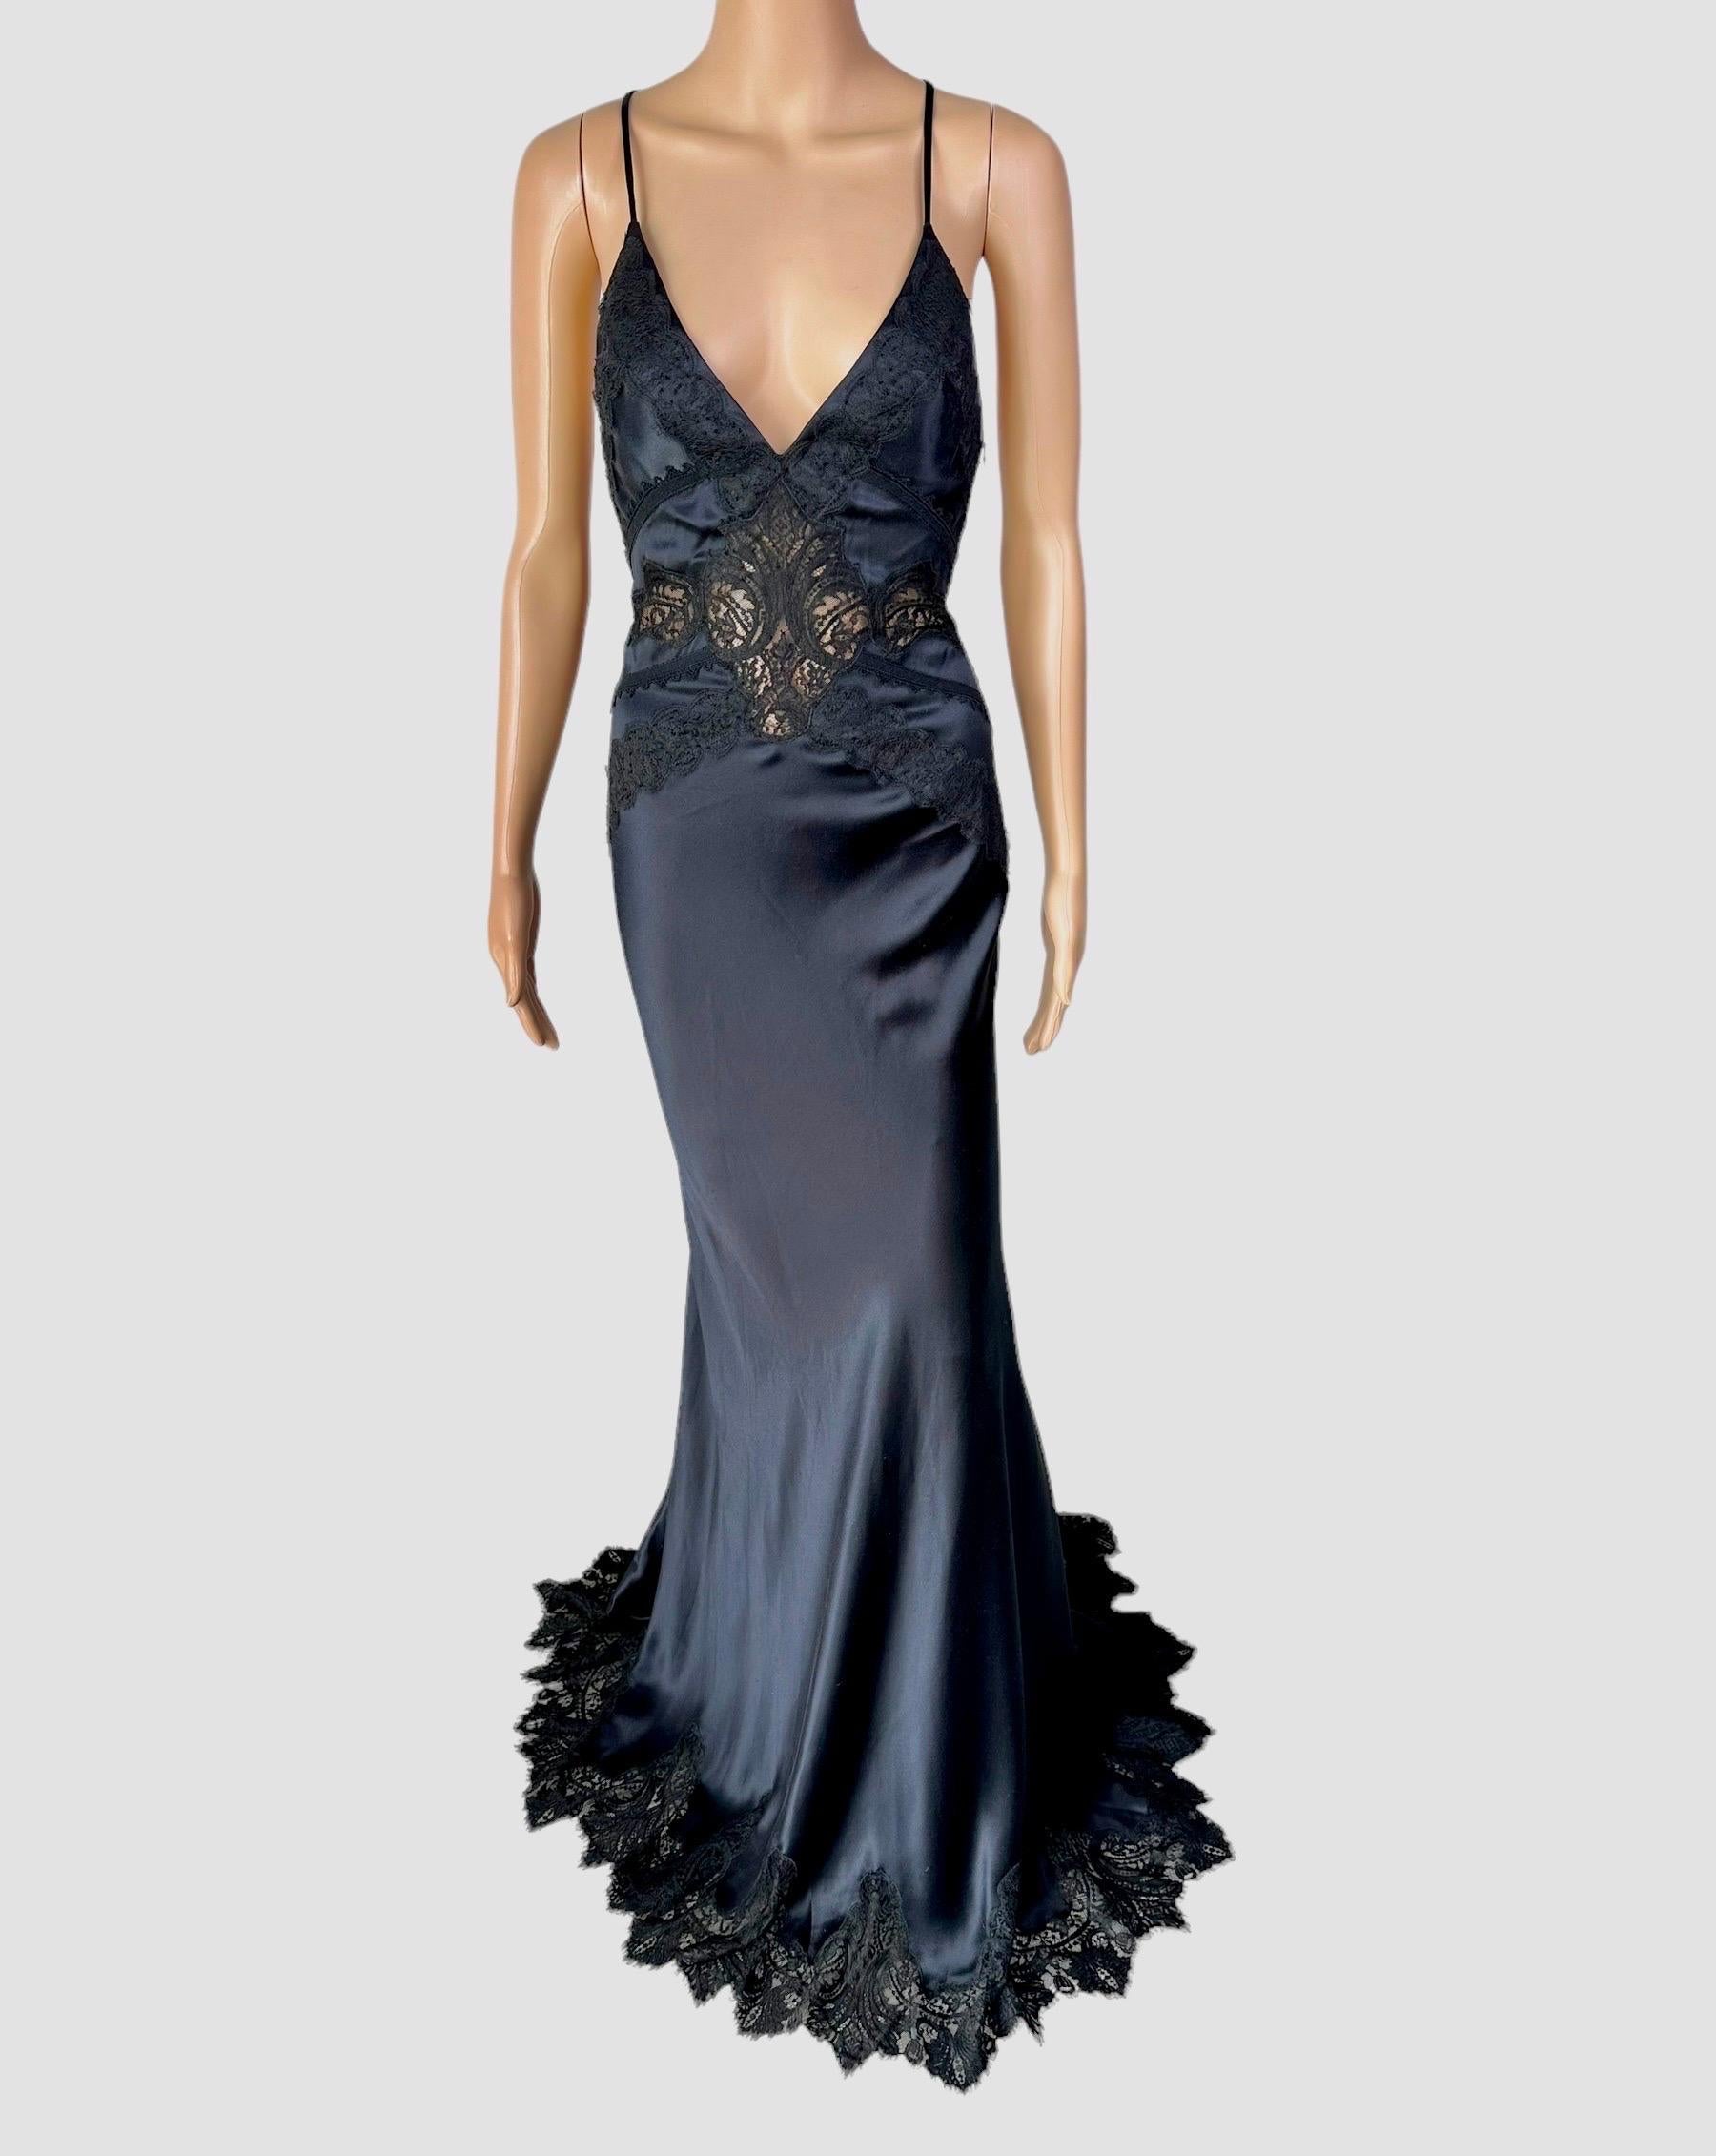 Versace c.2006 Plunging Neckline Sheer Lace Panels Backless Evening Dress Gown  For Sale 8